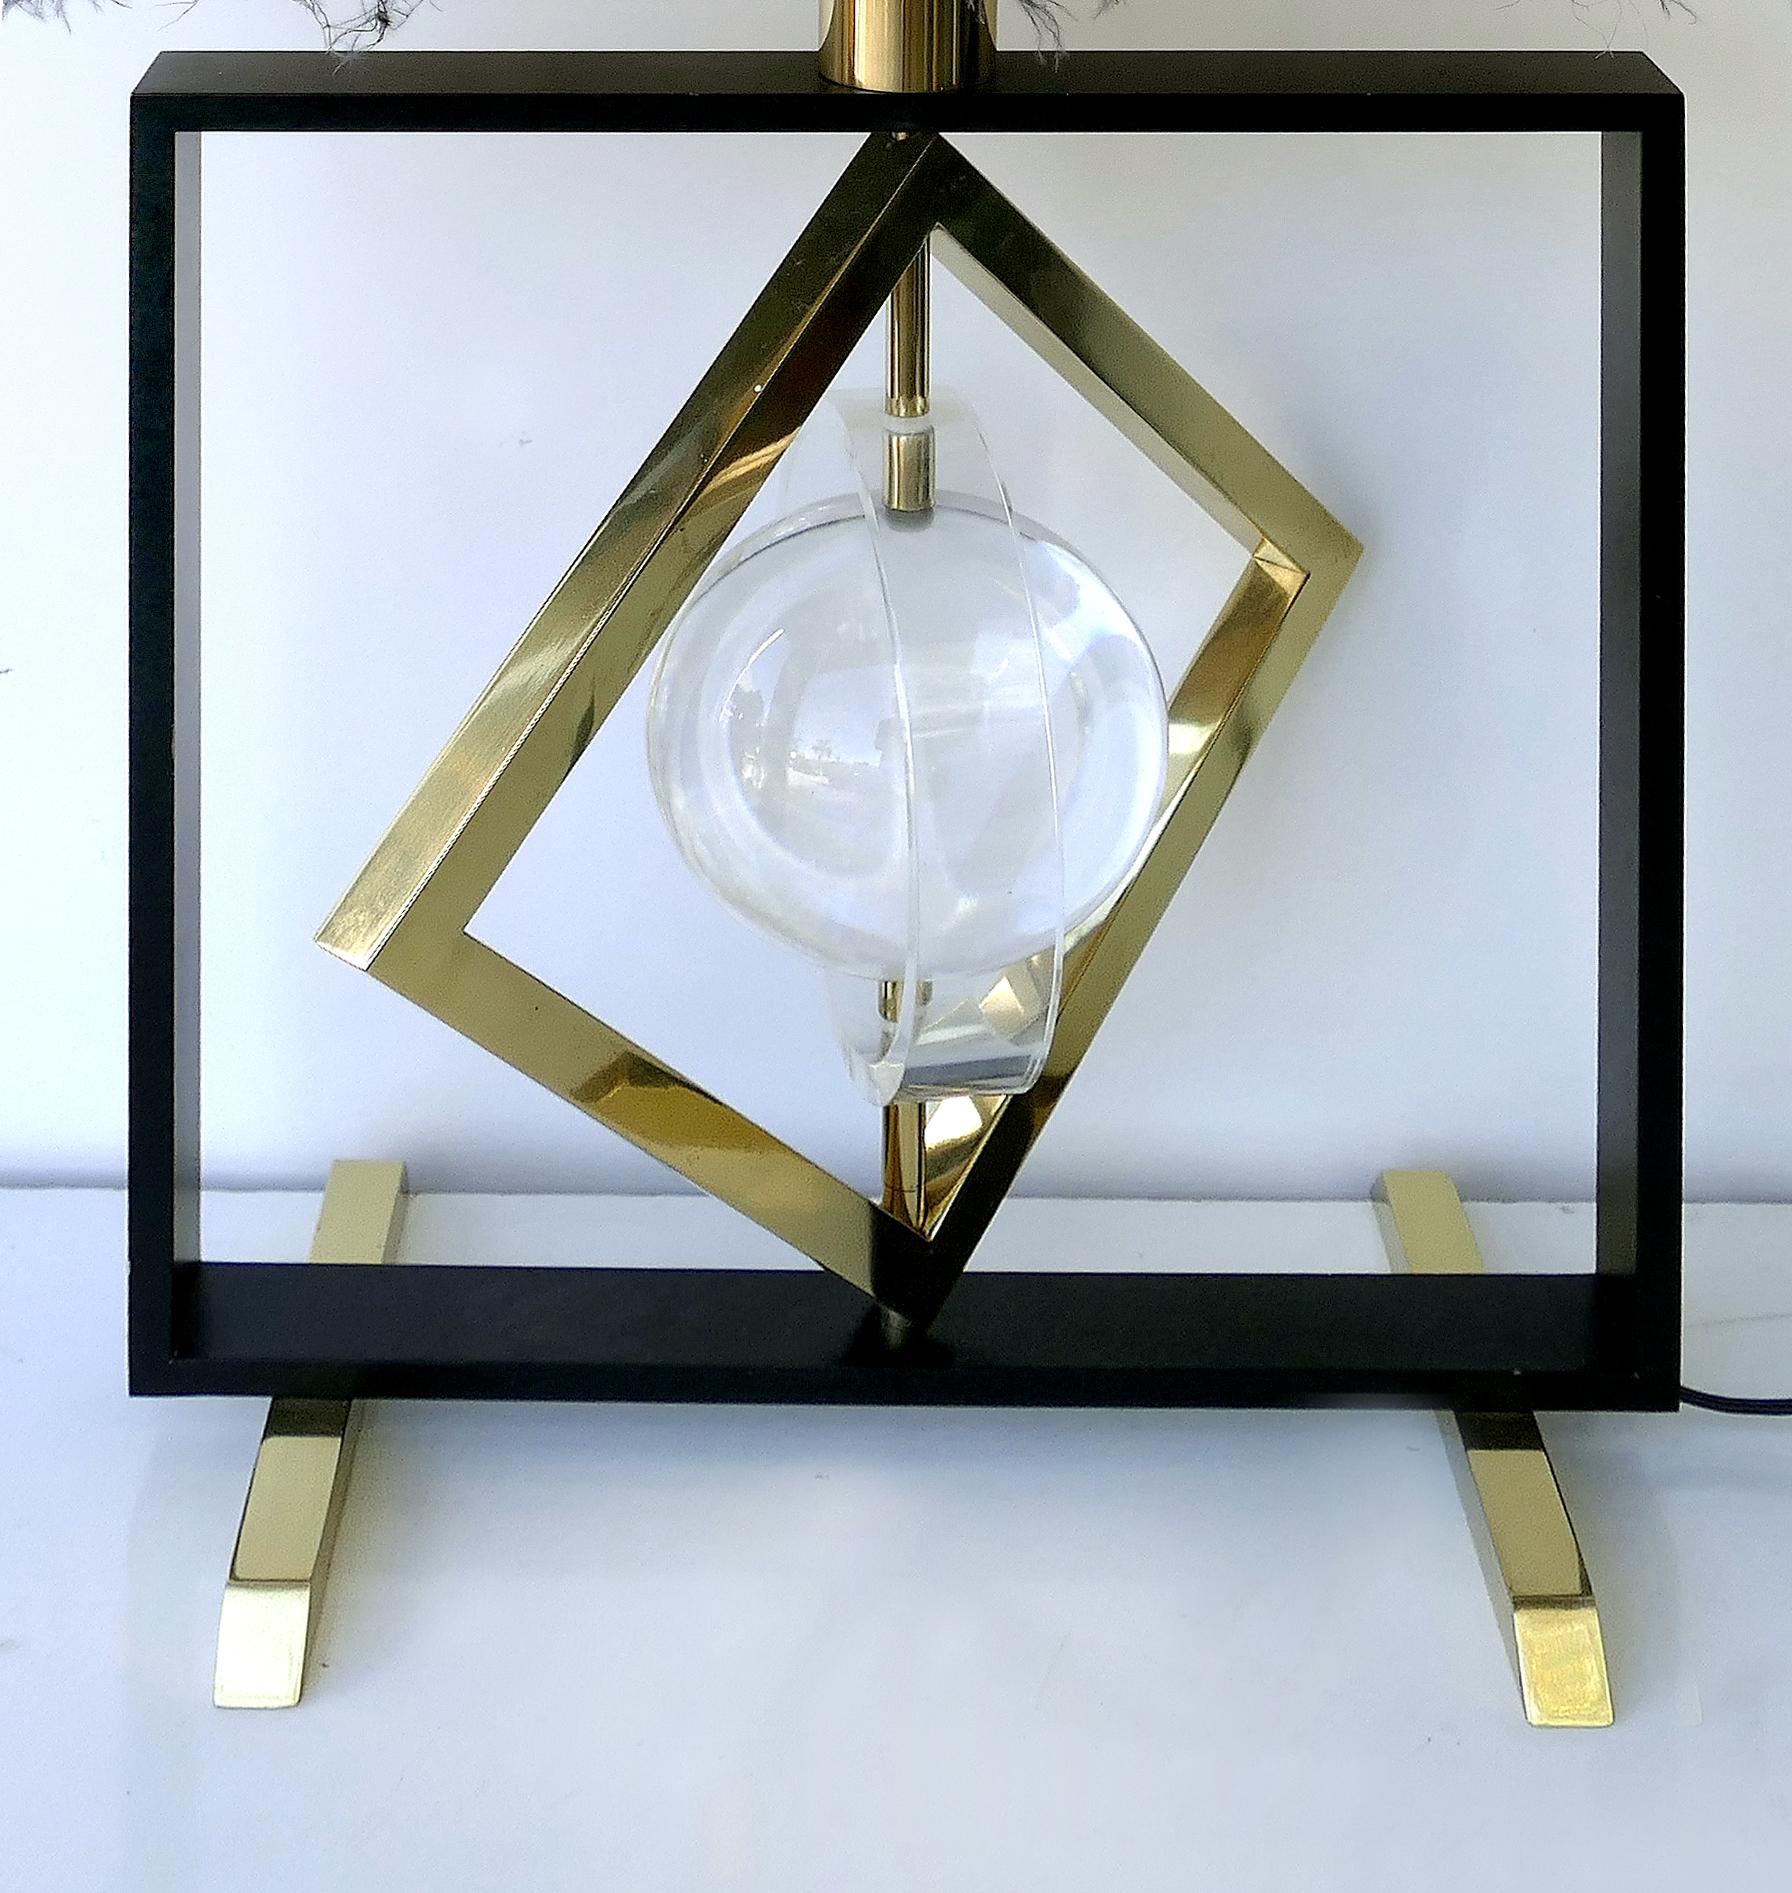 Banci sculptural kinetic table lamp with original shade.

Offered for sale is a stunning sculptural Italian 1980s table lamp attributed to Banci. The lamp has a kinetic brass diamond-shaped ring and a Lucite round ring that both rotate around a